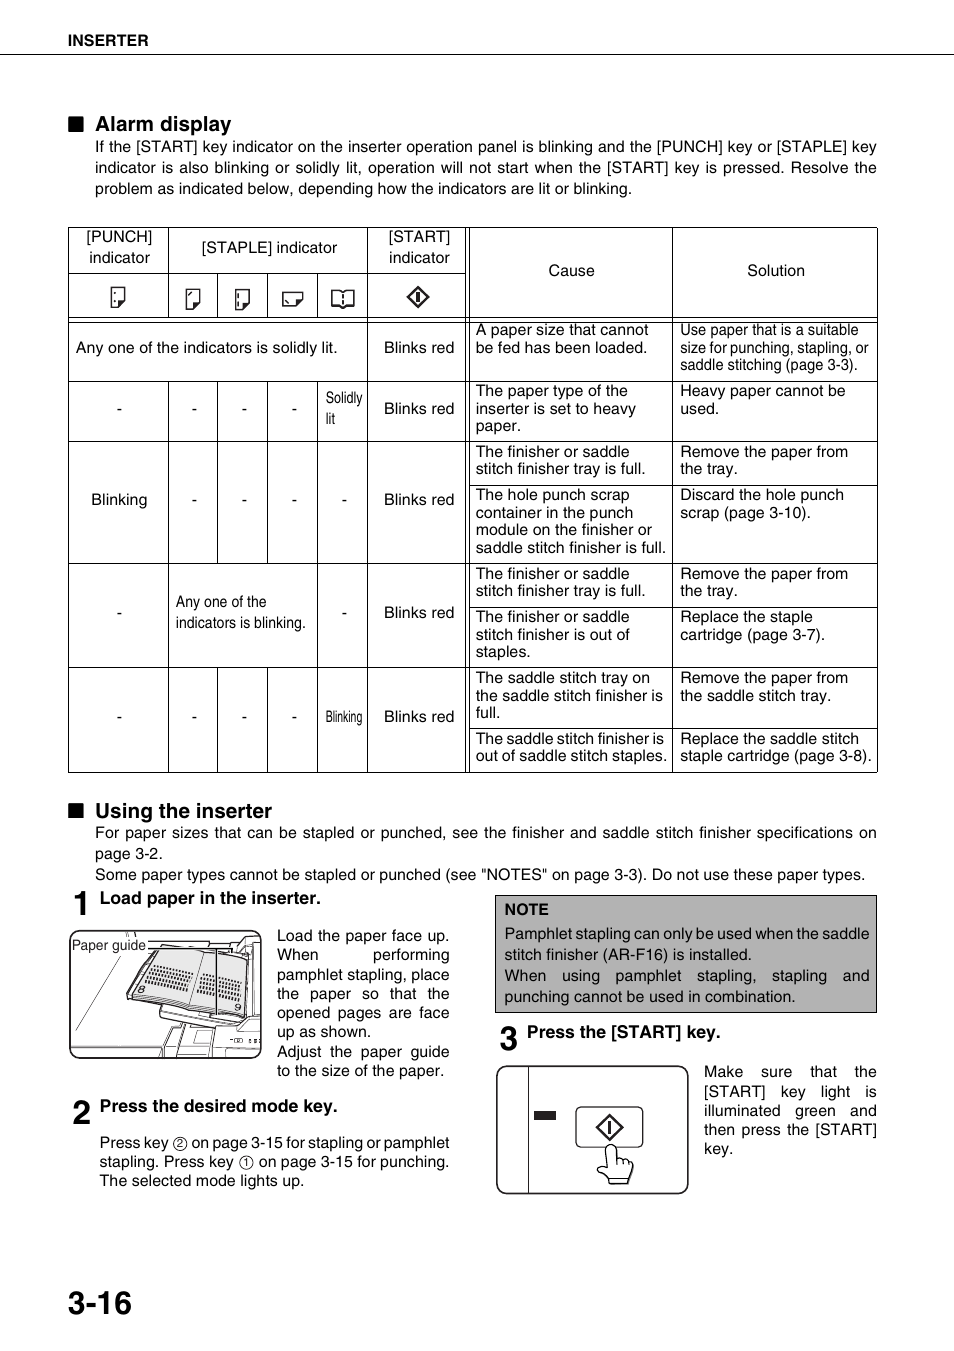 Alarm display, Using the inserter | Sharp AR-M700N User Manual | Page 72 / 172